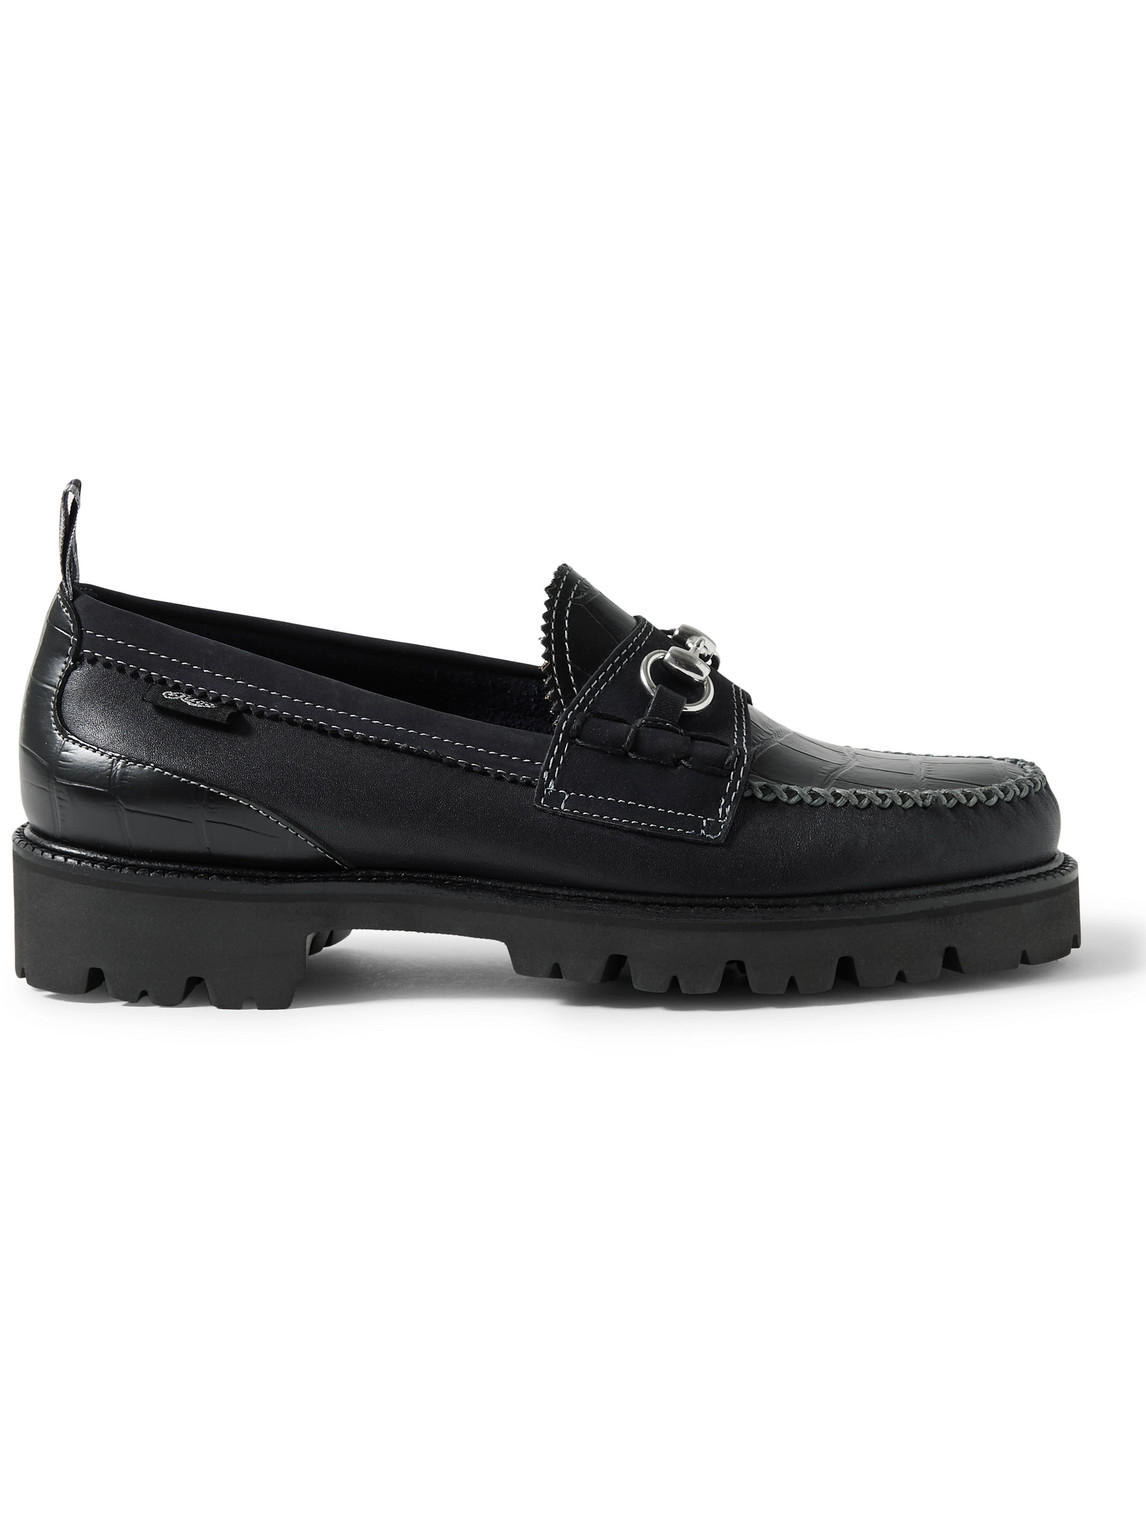 G.H. BASS & CO. NICHOLAS DALEY LINCOLN WEEJUNS® EMBELLISHED SUEDE-TRIMMED CROC-EFFECT LEATHER LOAFERS